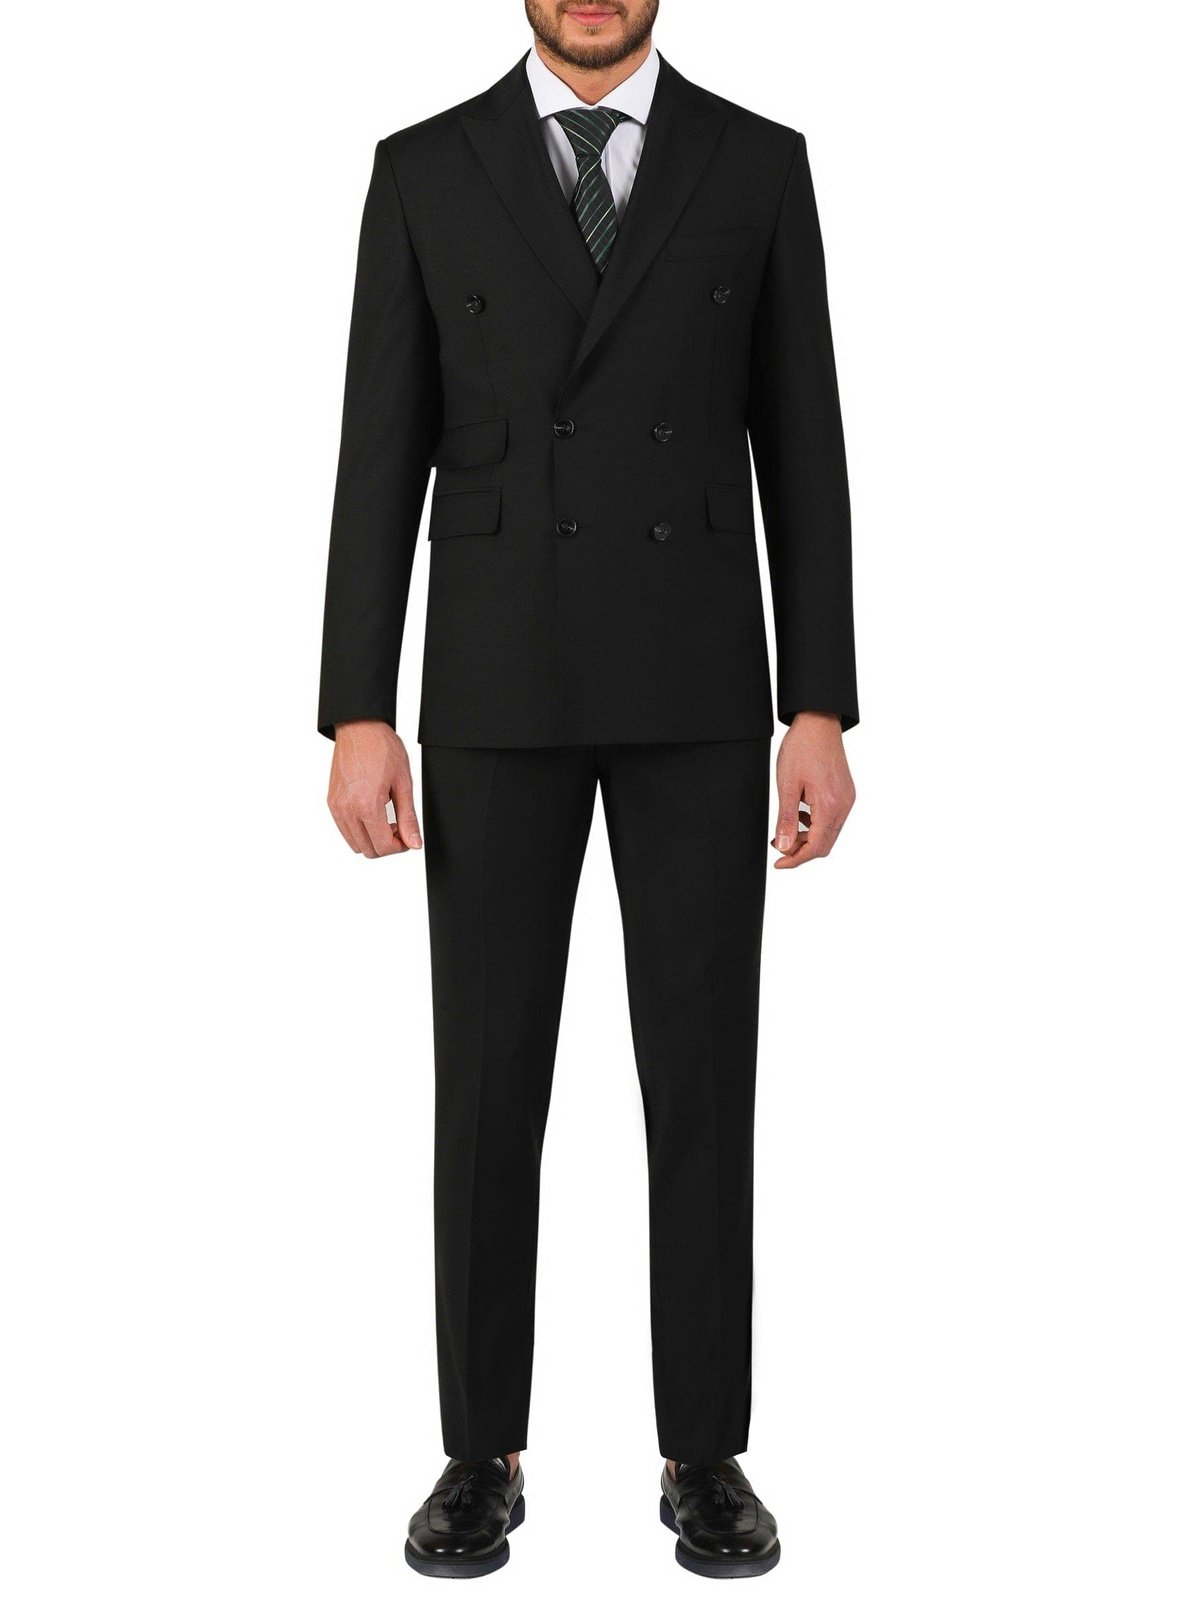 Di'nucci SUITS 40R Di'nucci Black Textured Double Breasted Wool Suit